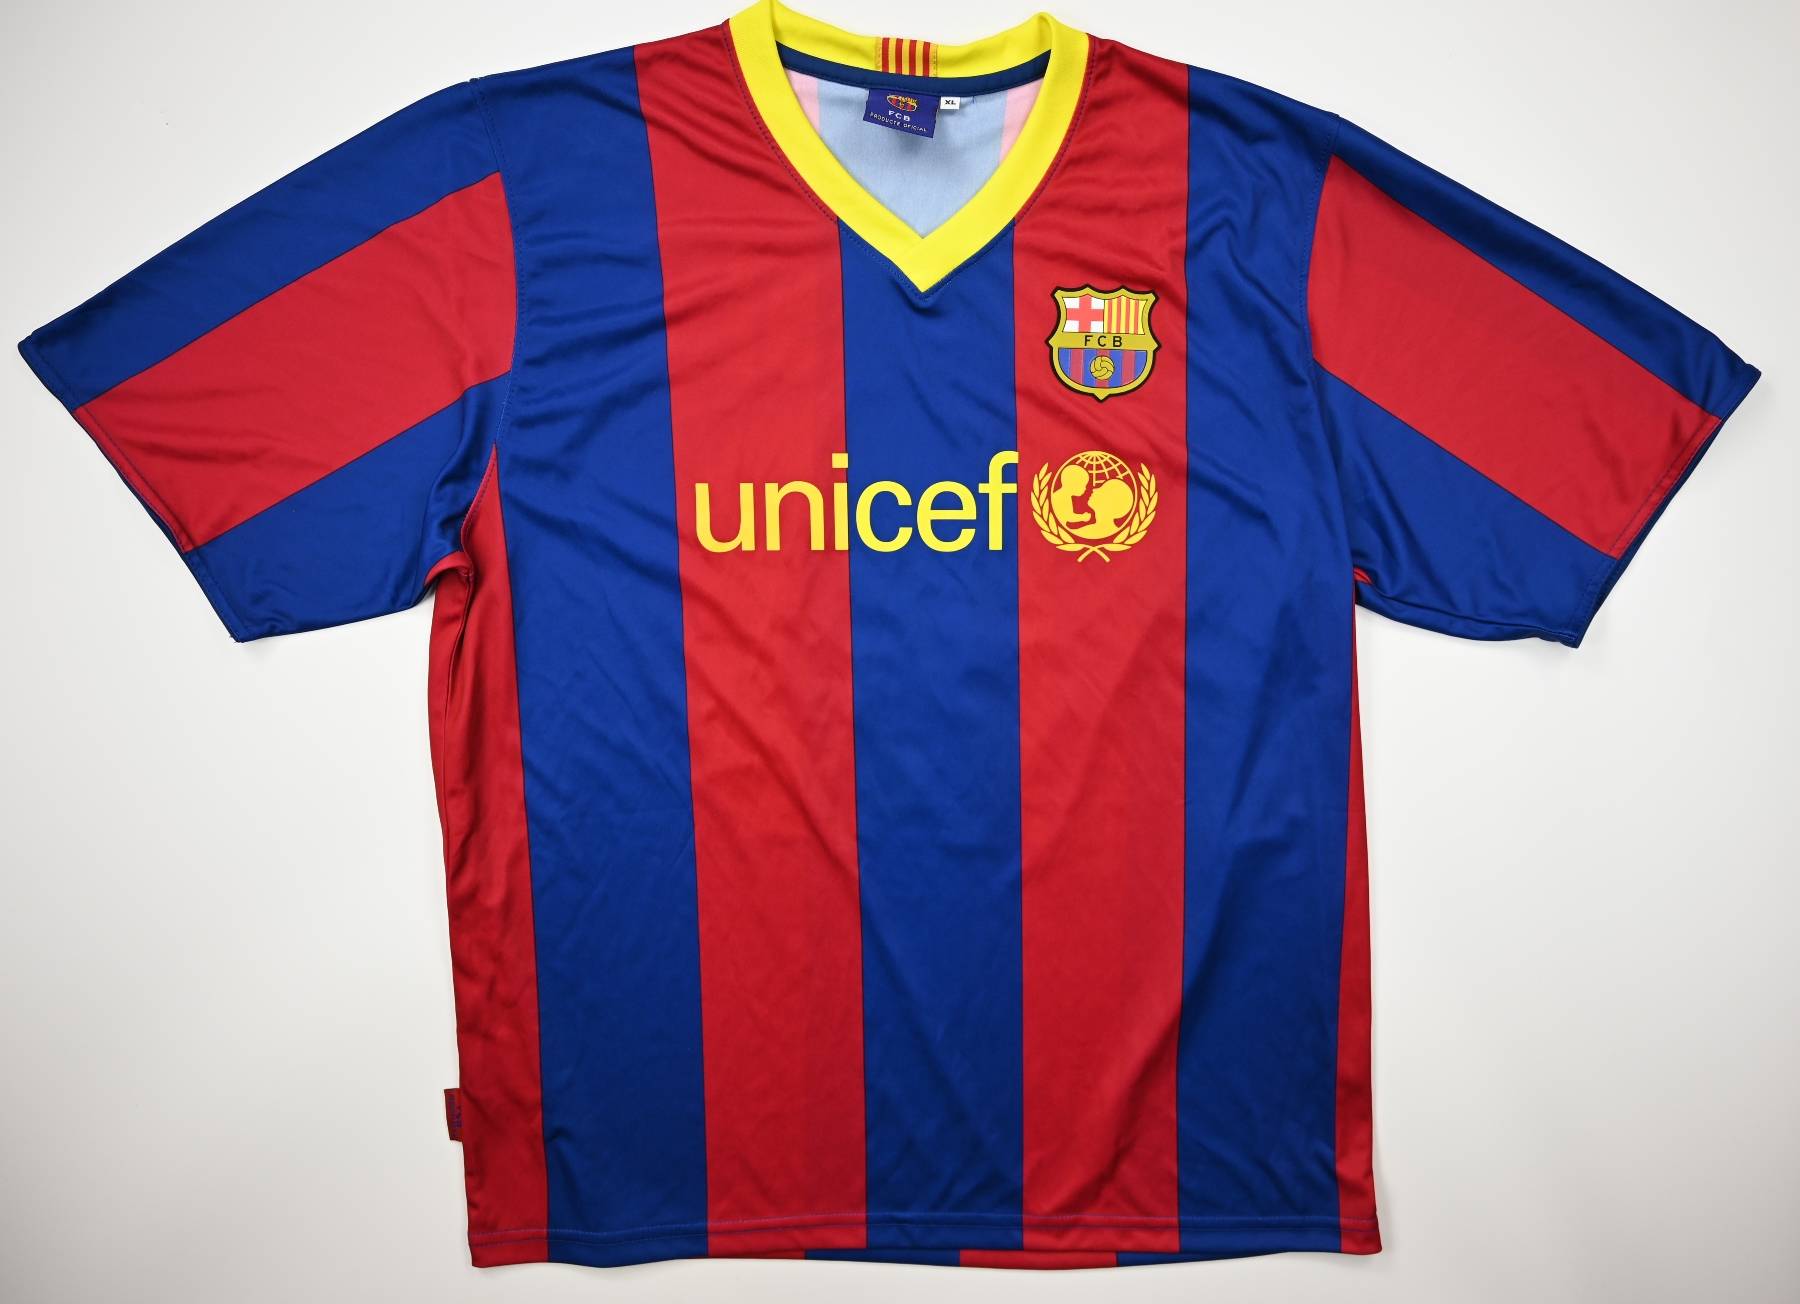 Lionel Messi signed 2010/11 Barcelona shirt — JustCollecting